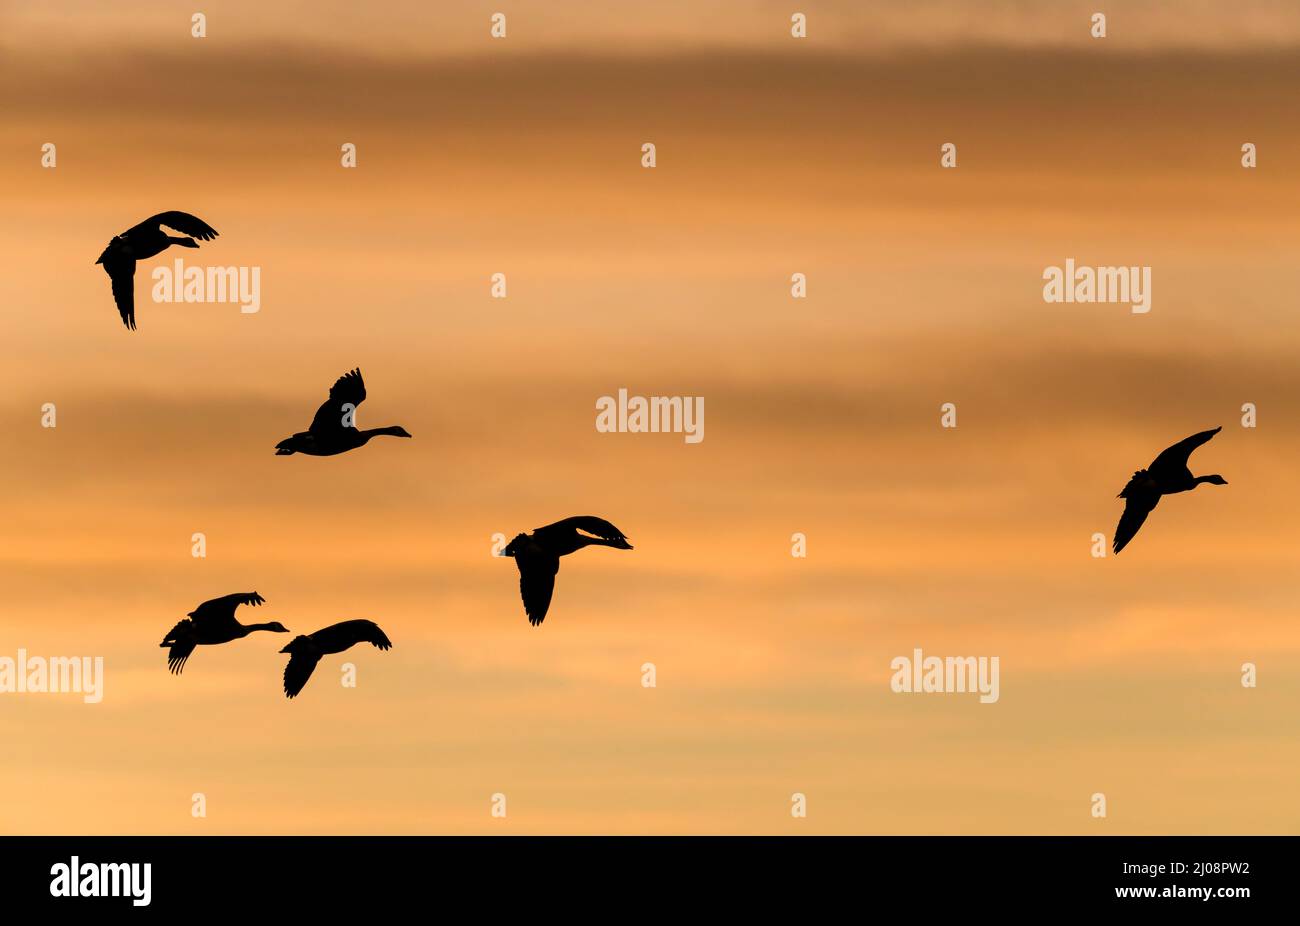 Flying Geese - A team of Canadian Geese flying on a colorful Winter sunset sky. Colorado, USA. Stock Photo